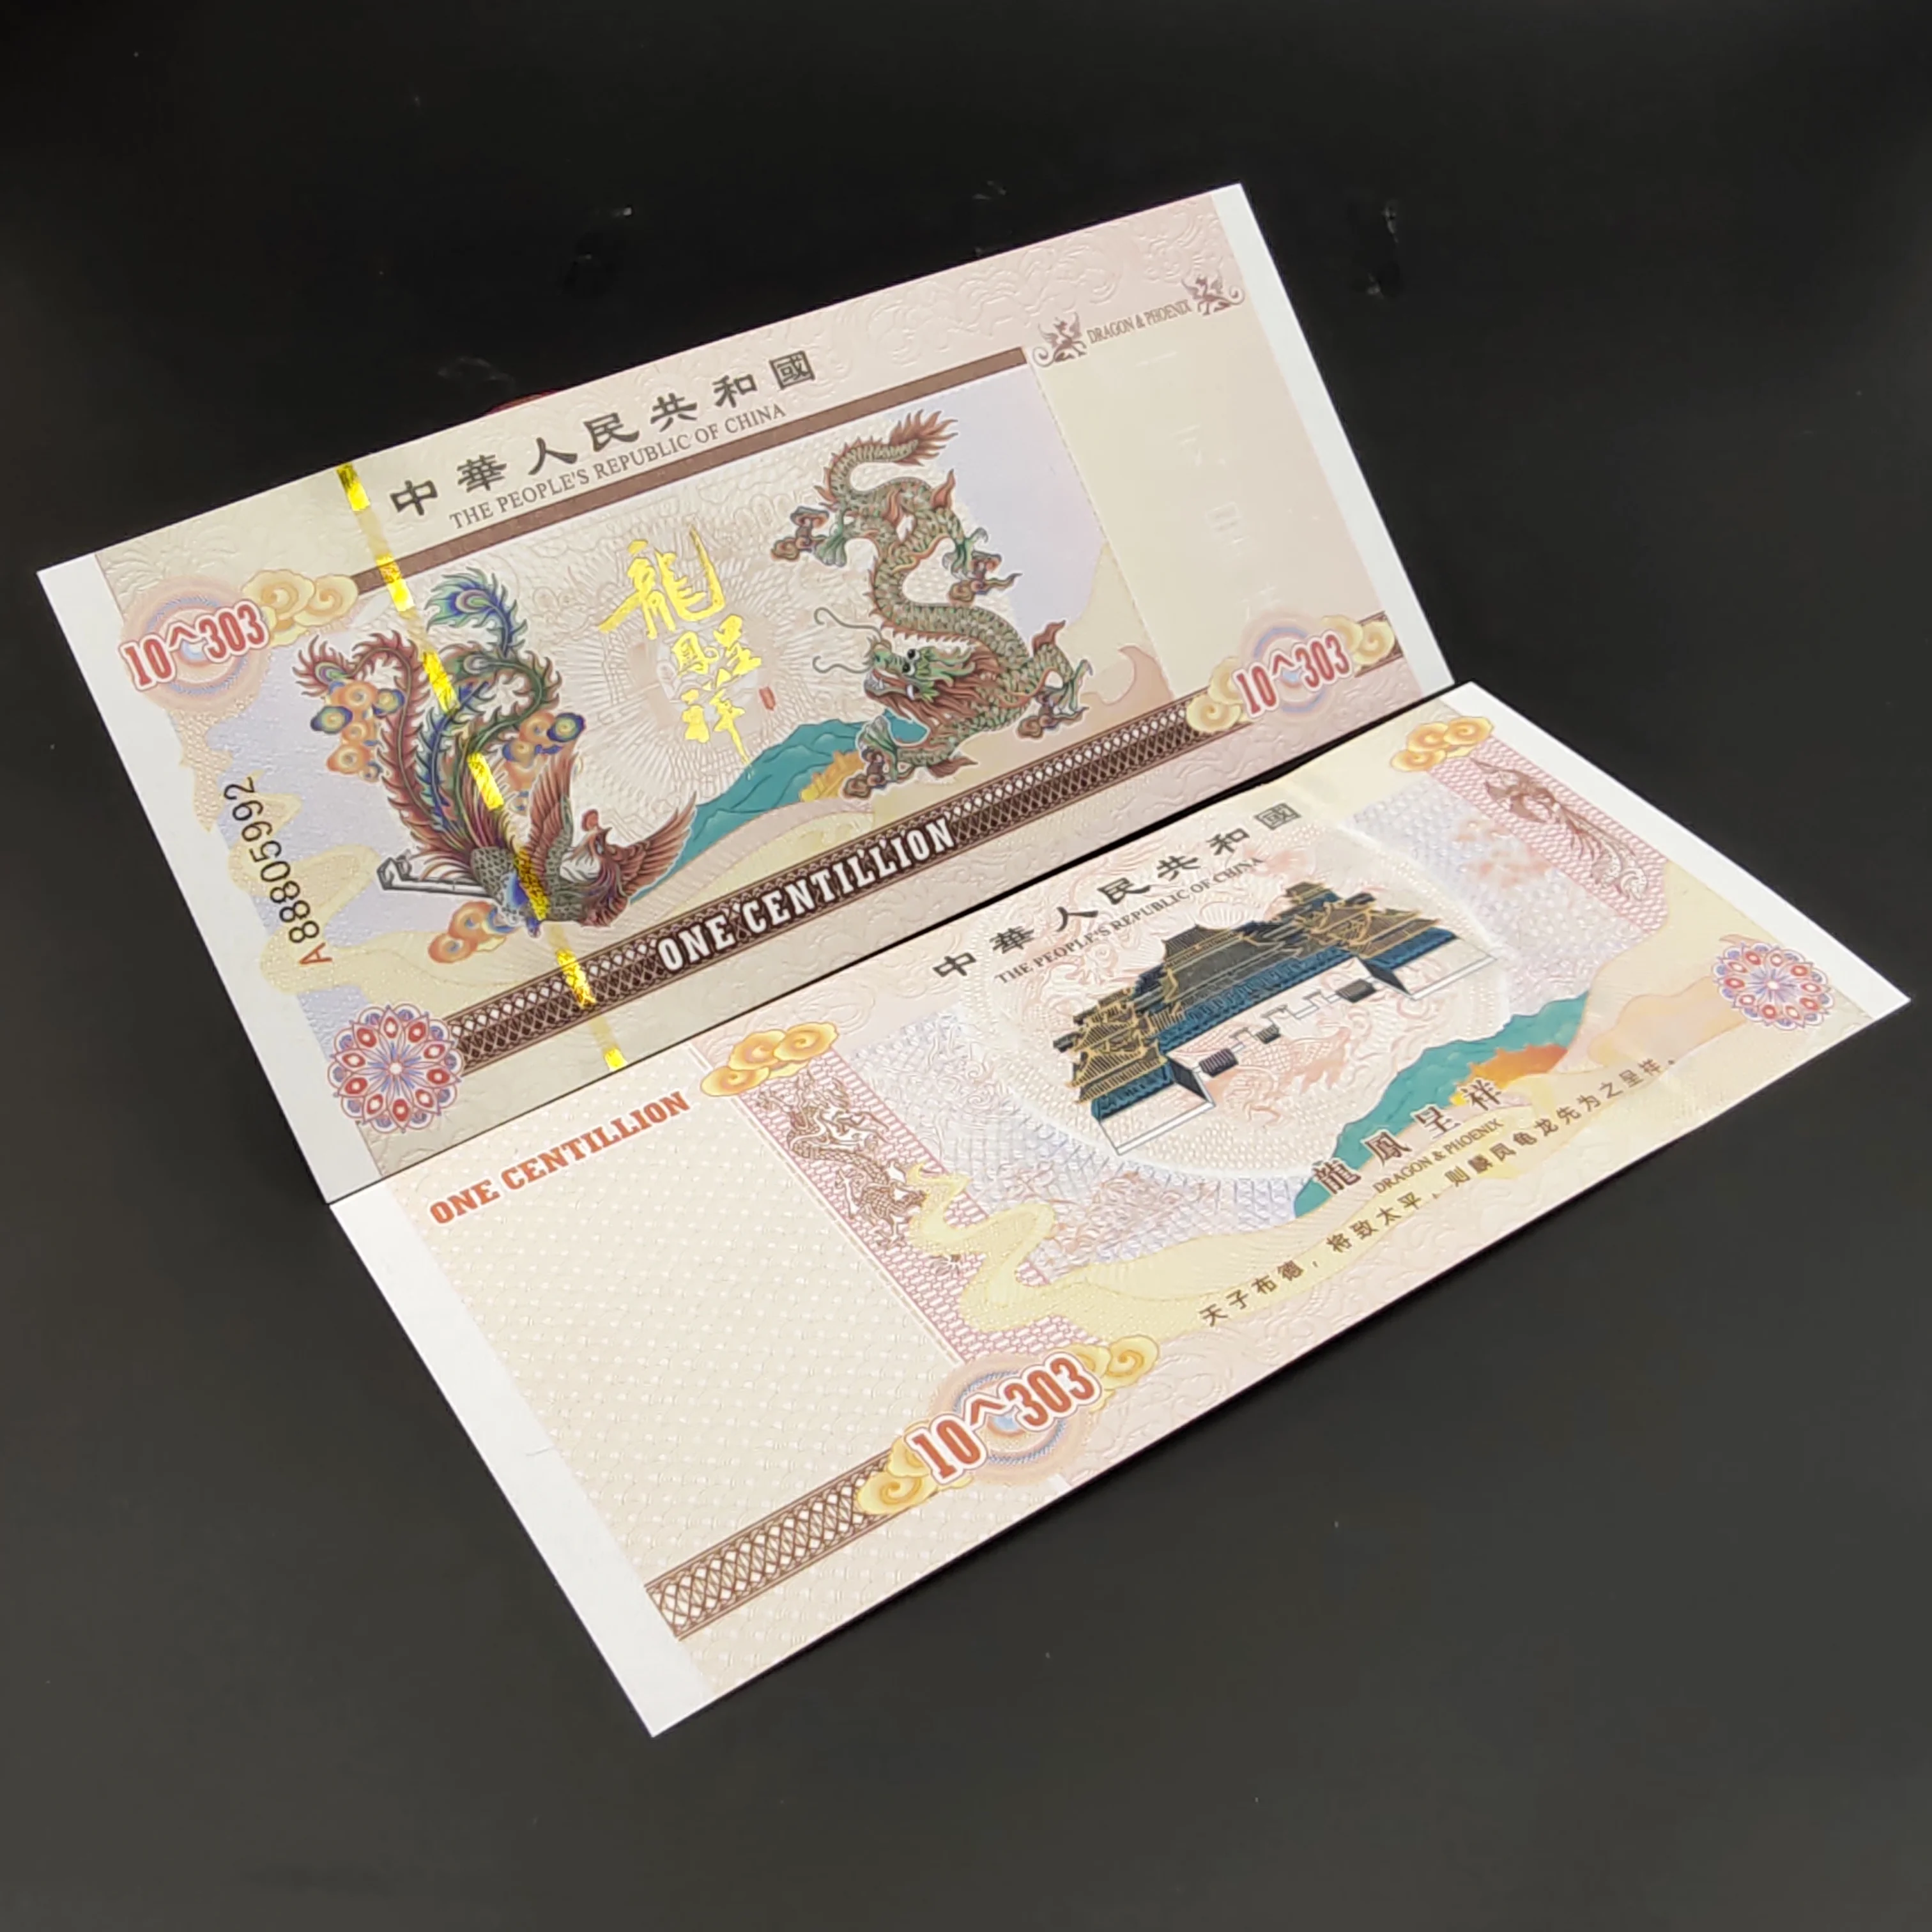 10 Pieces Of Chinese ONE CENTILLION Dragon and Phoenix Banknotes/With UV Light